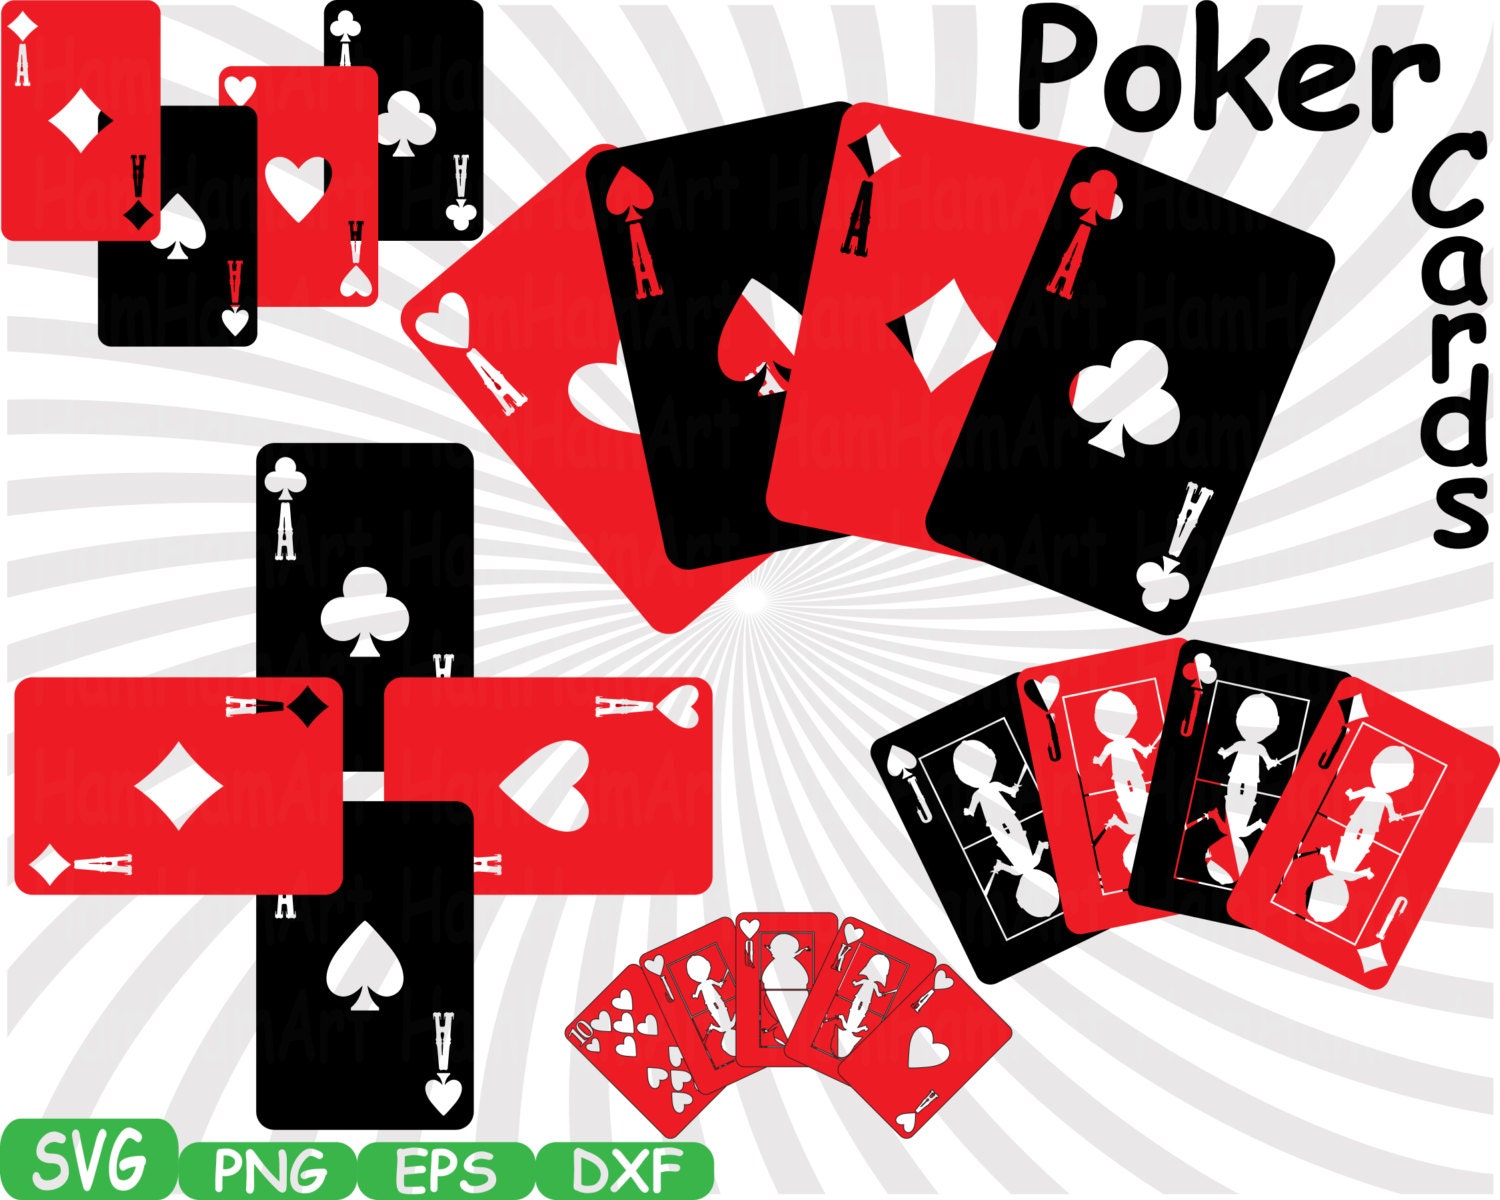 Download Poker Playing cards clip art suits casino games Cutting SVG, DXF,EPS,png Vinyl cut Design ...